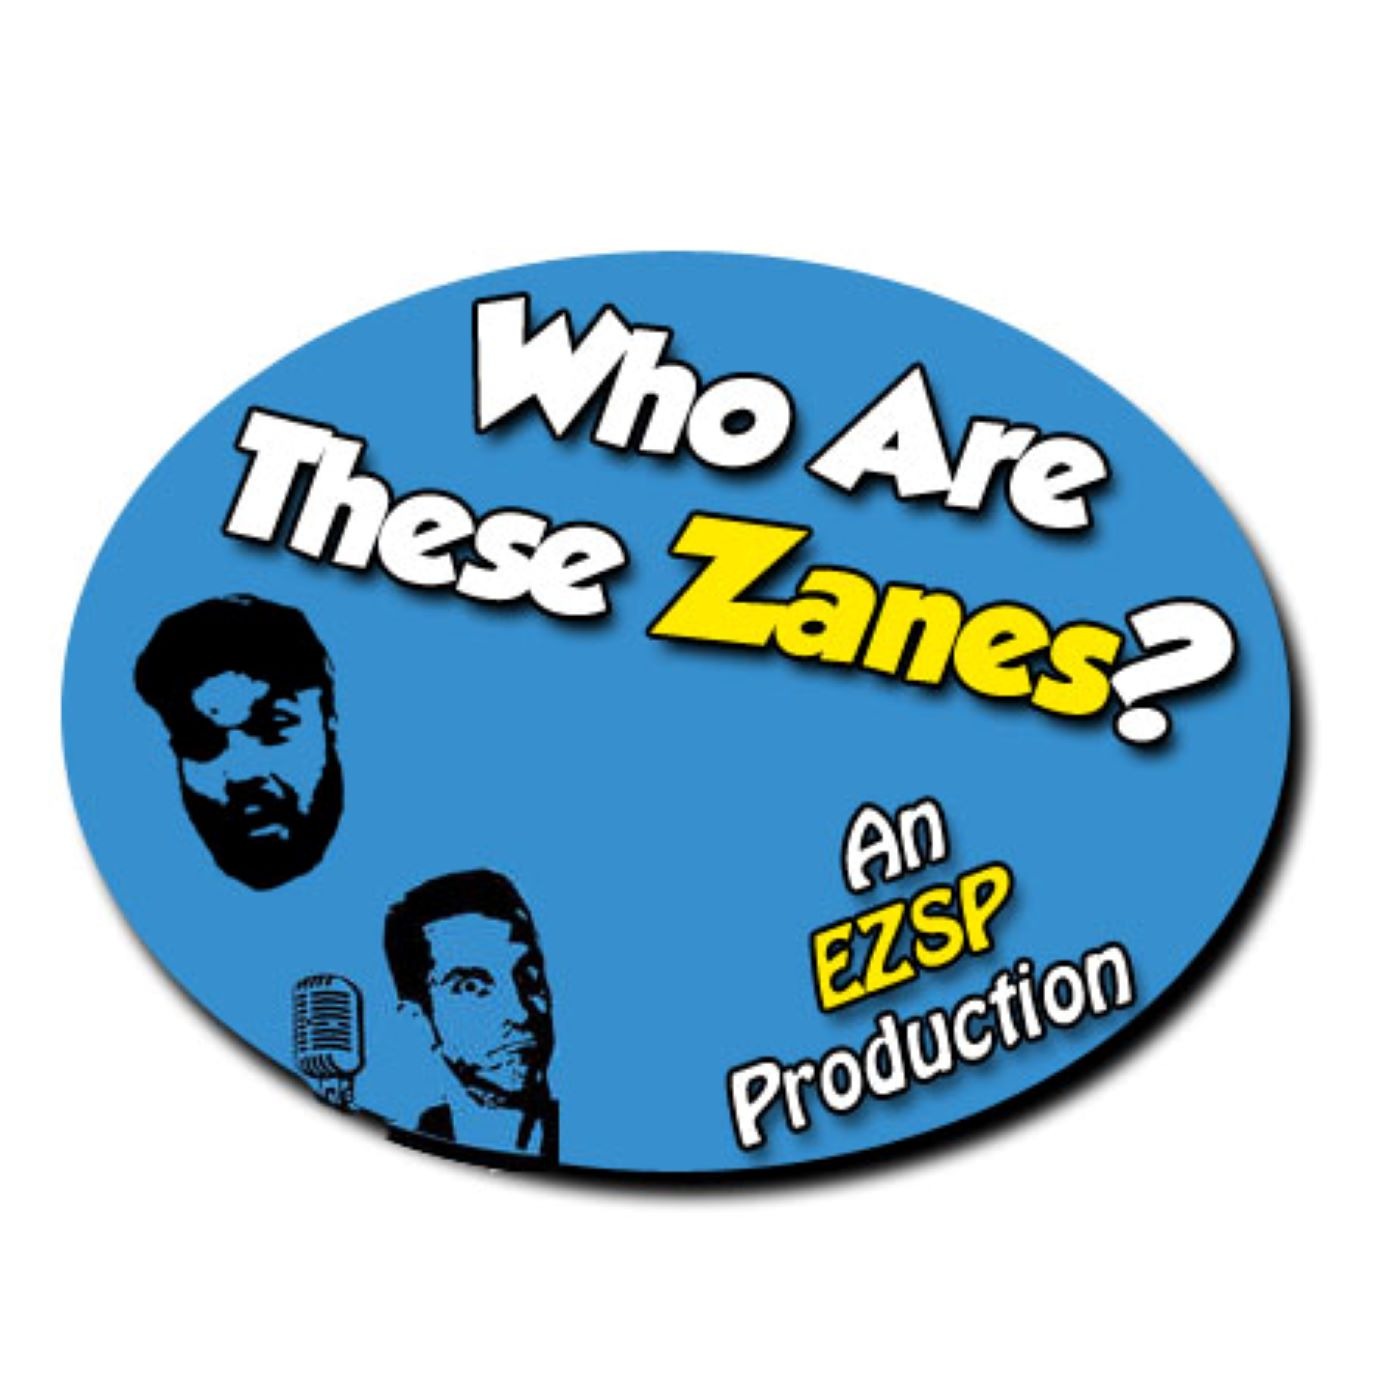 Free Clip - Who Are These Zanes? Ep 45